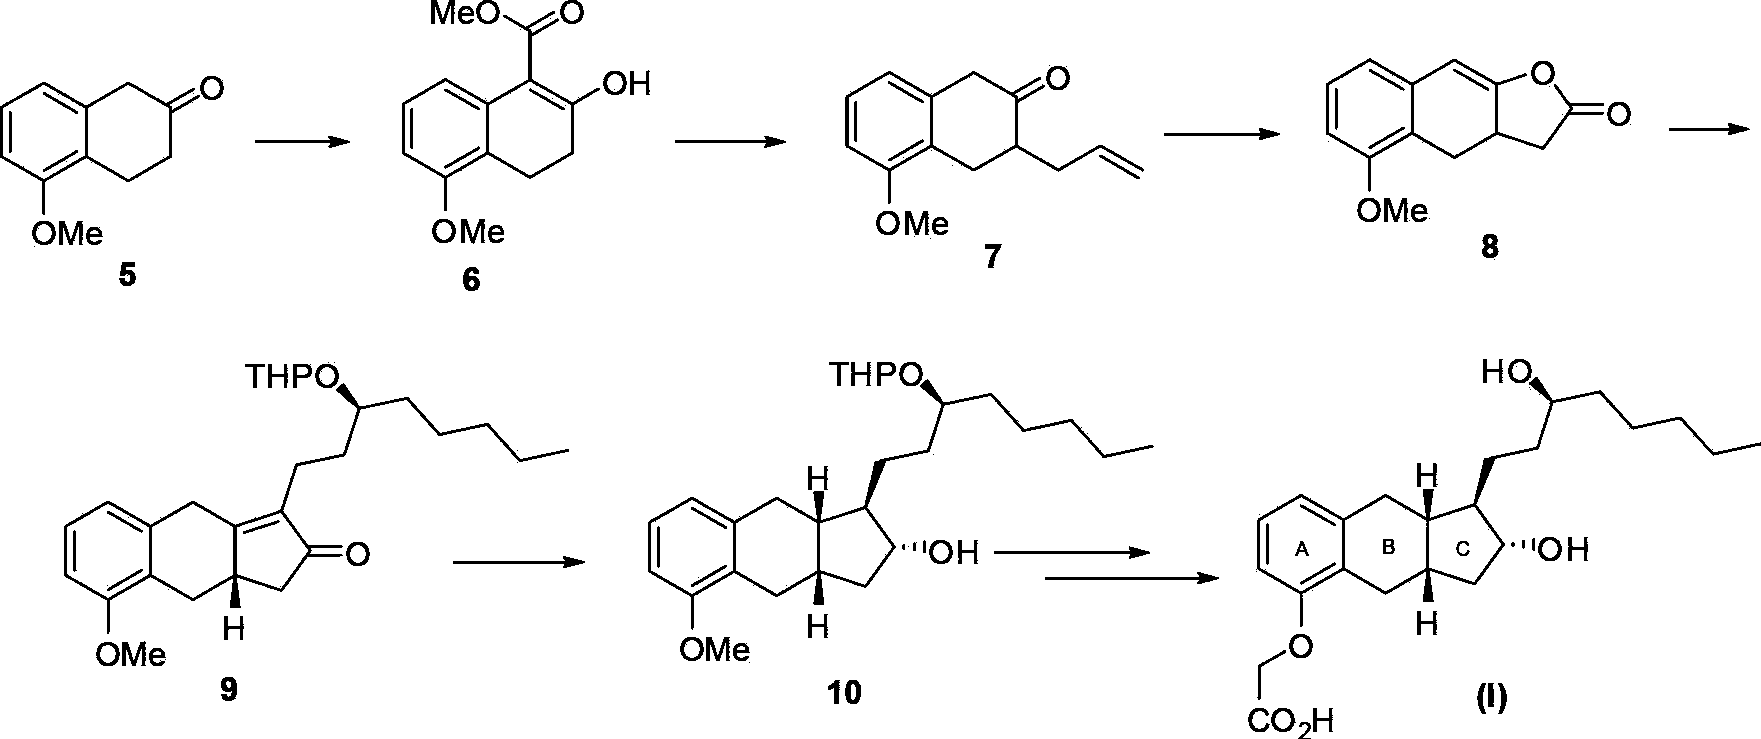 Intermediates for synthesizing treprostinil and preparation method thereof as well as the preparation method of treprostinil thereby